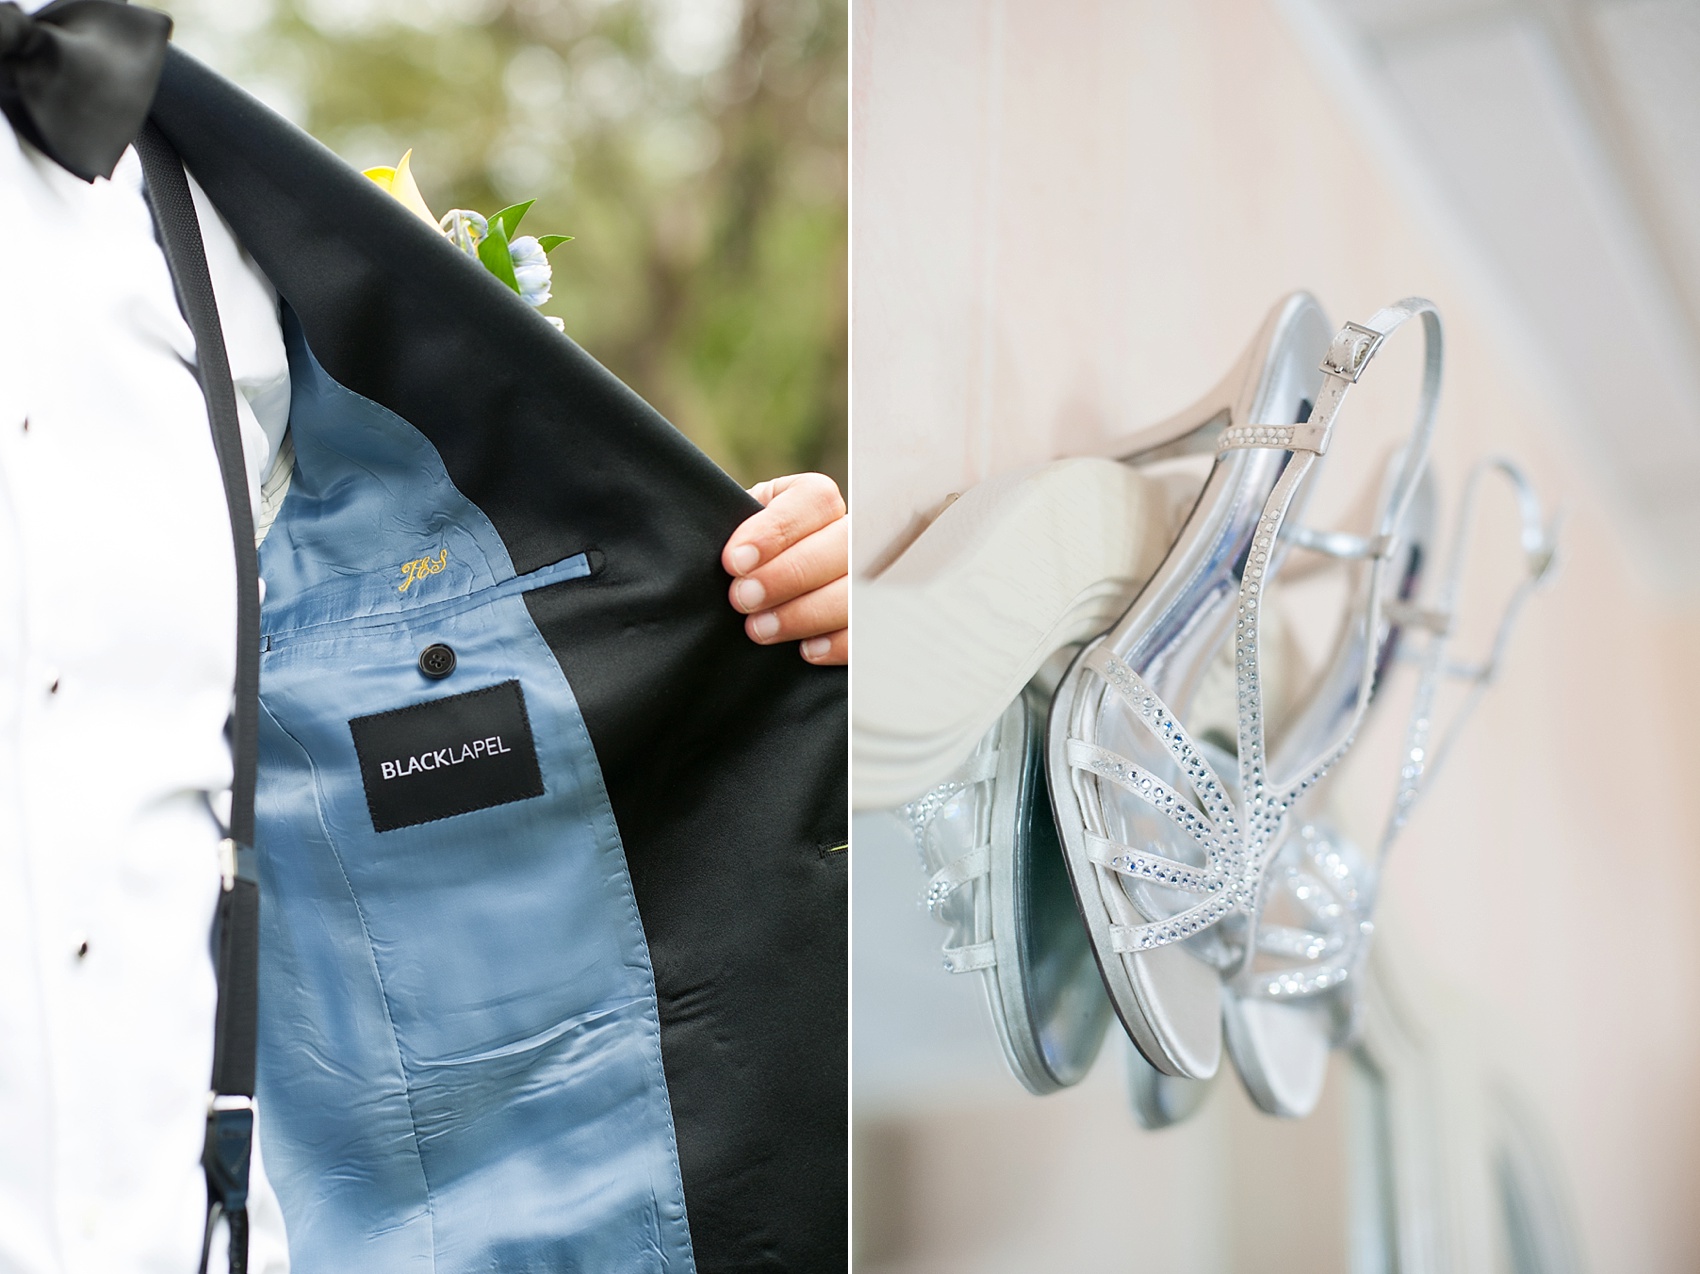 Perona Farms wedding monogrammed groom's suit and bride's rhinestone low heel, photos rustic colorful summer celebration. Pictures by New Jersey photographer Mikkel Paige Photography.